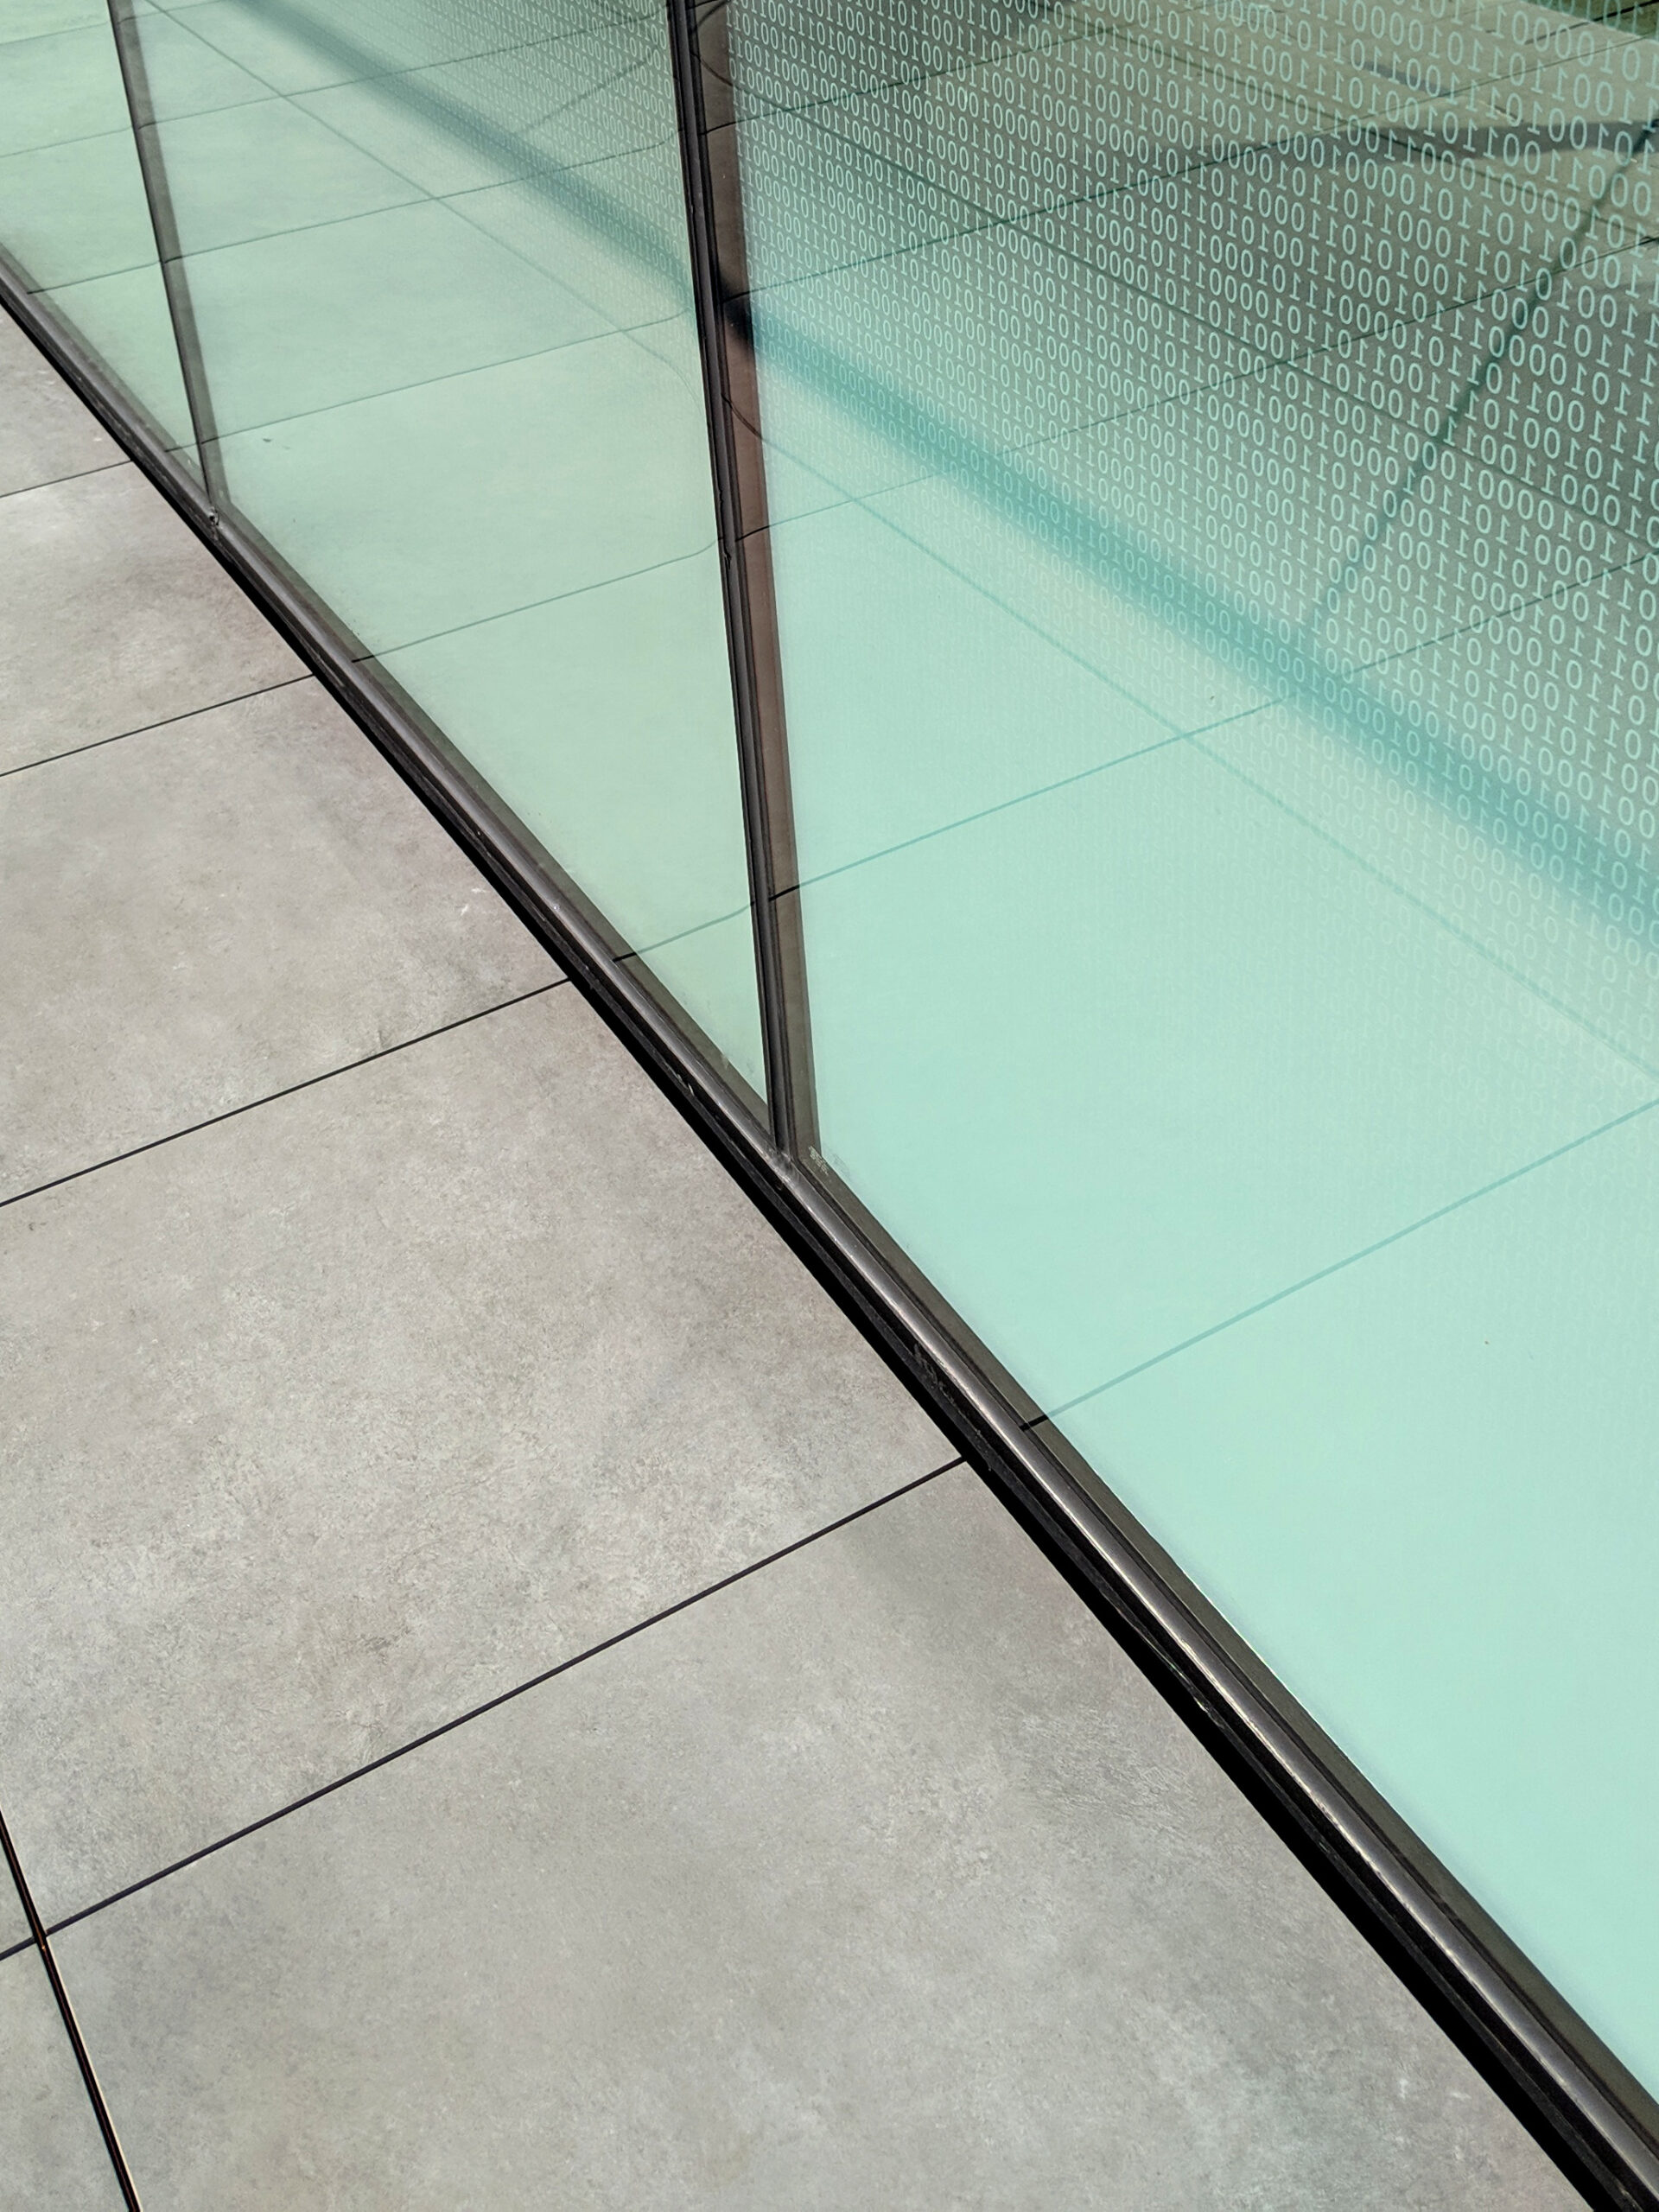 Custom fritted glass with binary code design detail along walkway